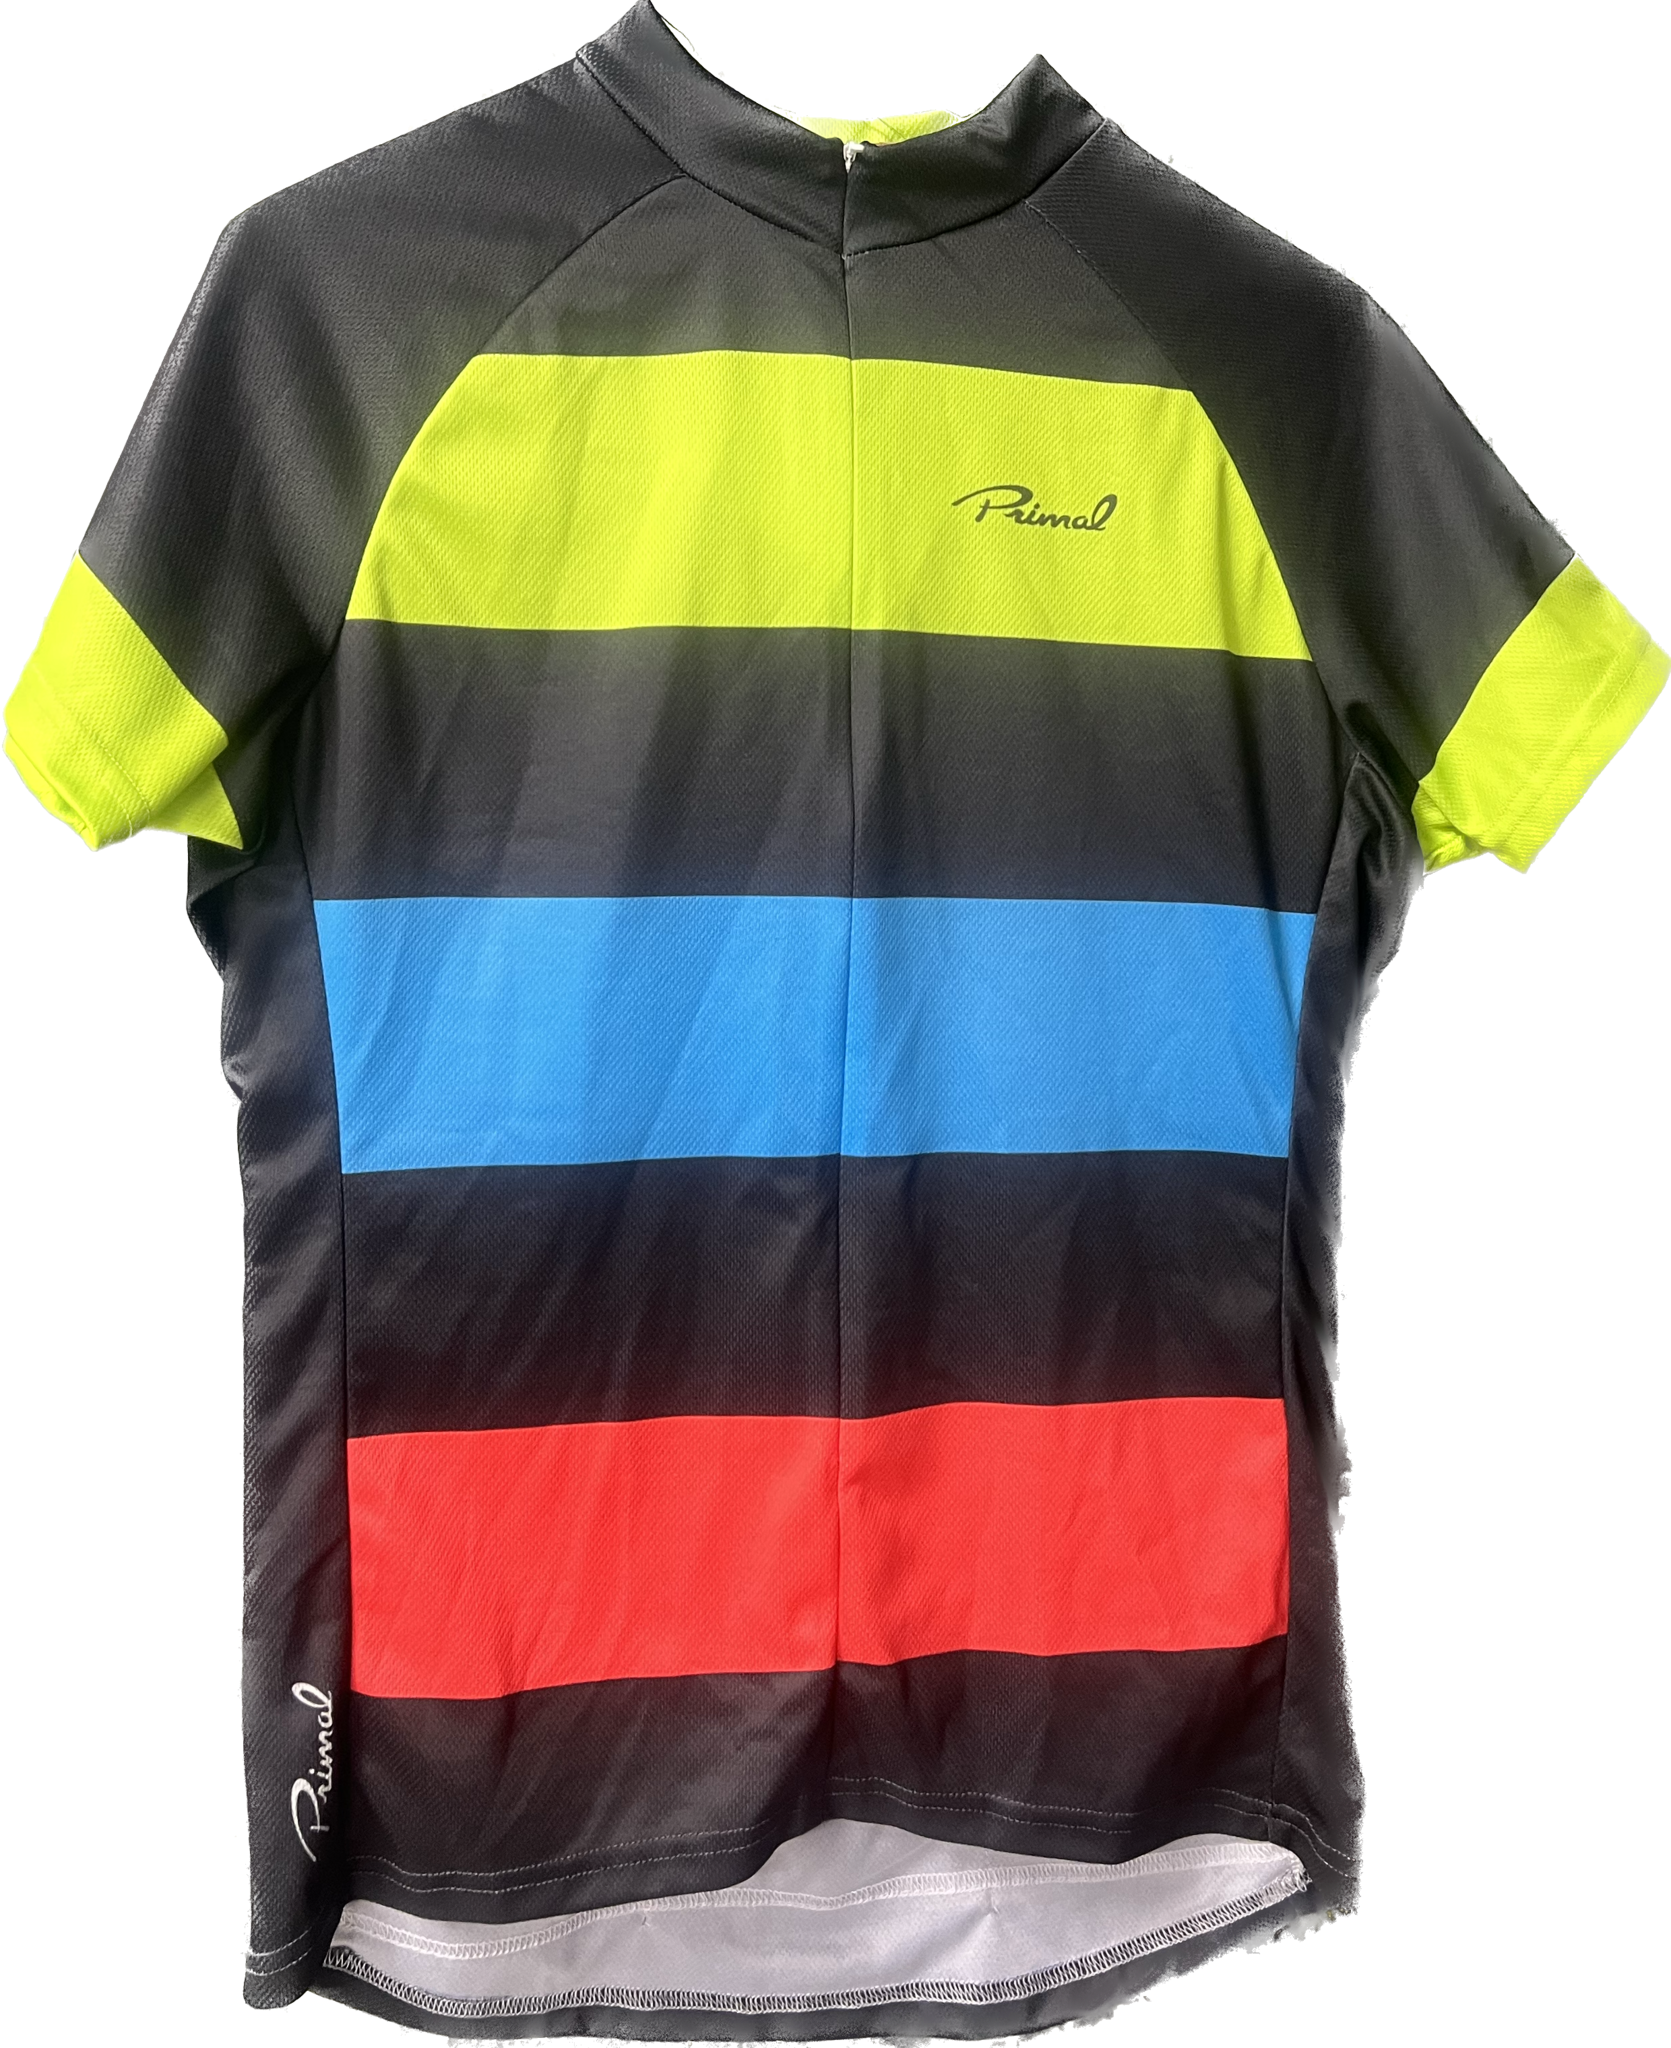 Primal Wear Men's and Women's Cycling Tops and Bottoms